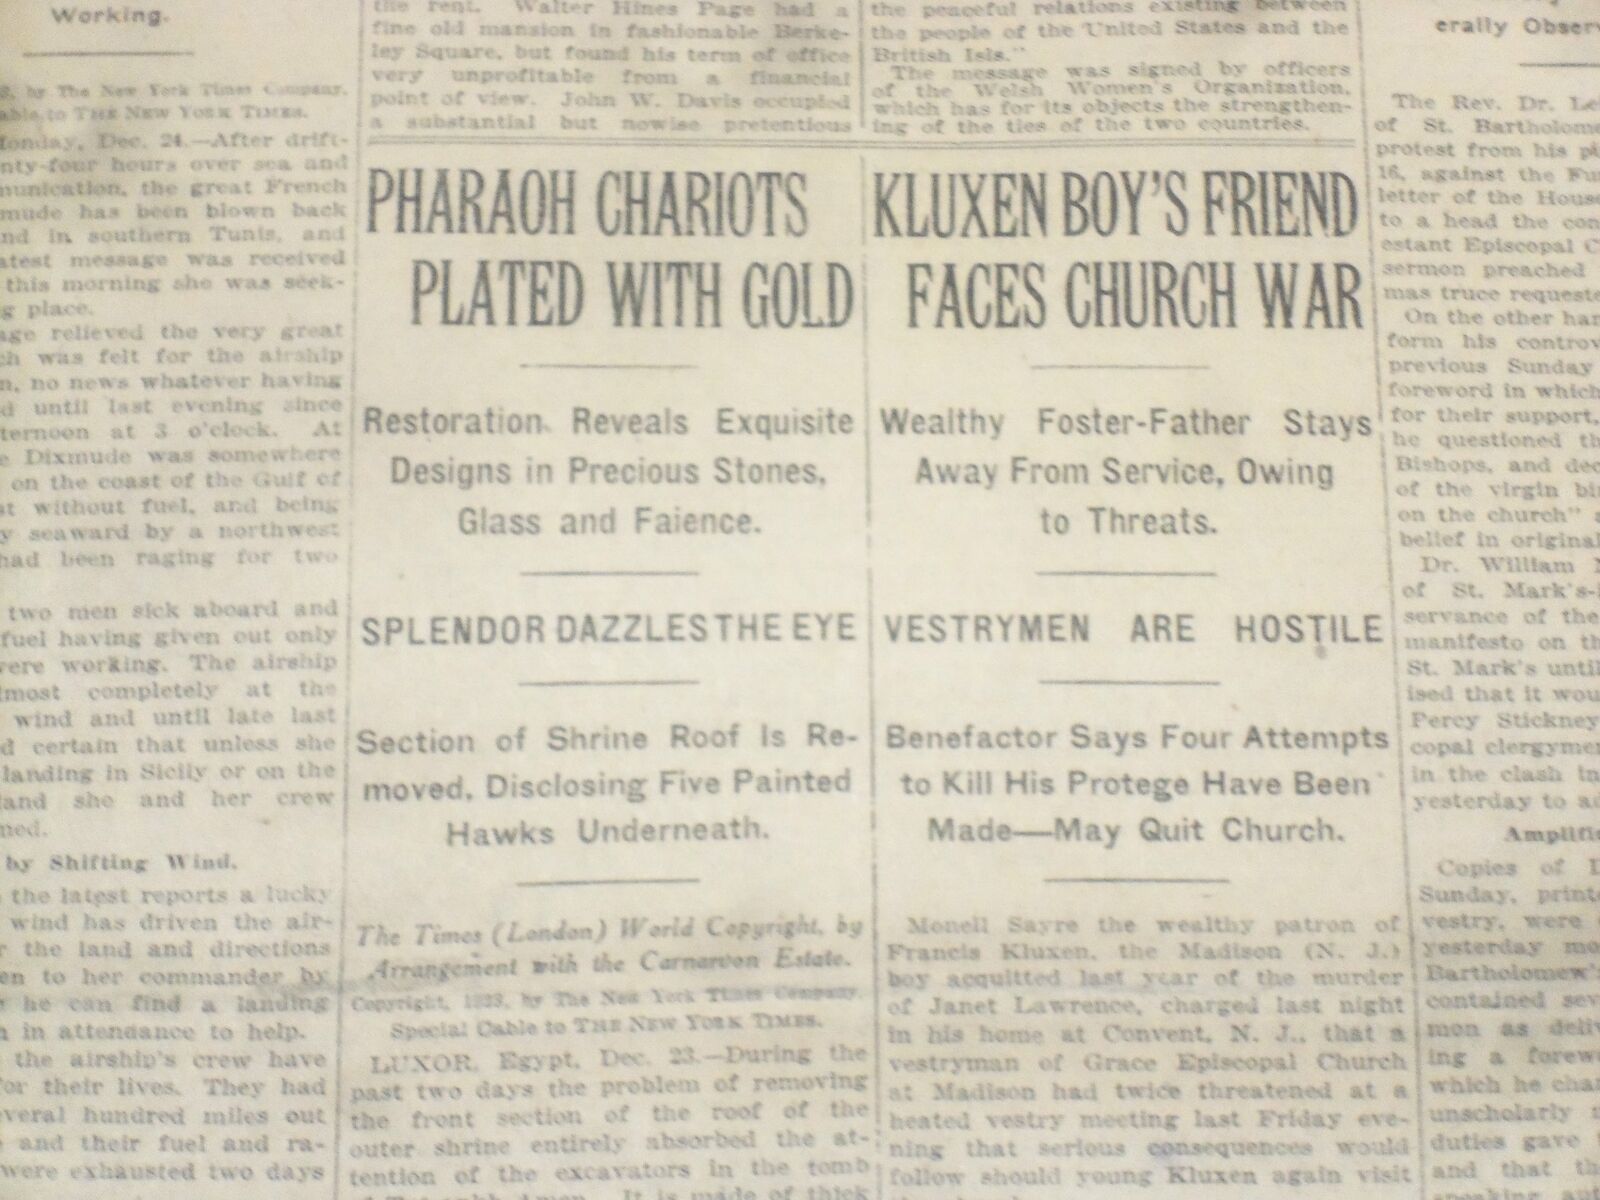 1923 DECEMBER 24 NEW YORK TIMES - PHARAOH CHARIOTS PLATED WITH GOLD - NT 9226